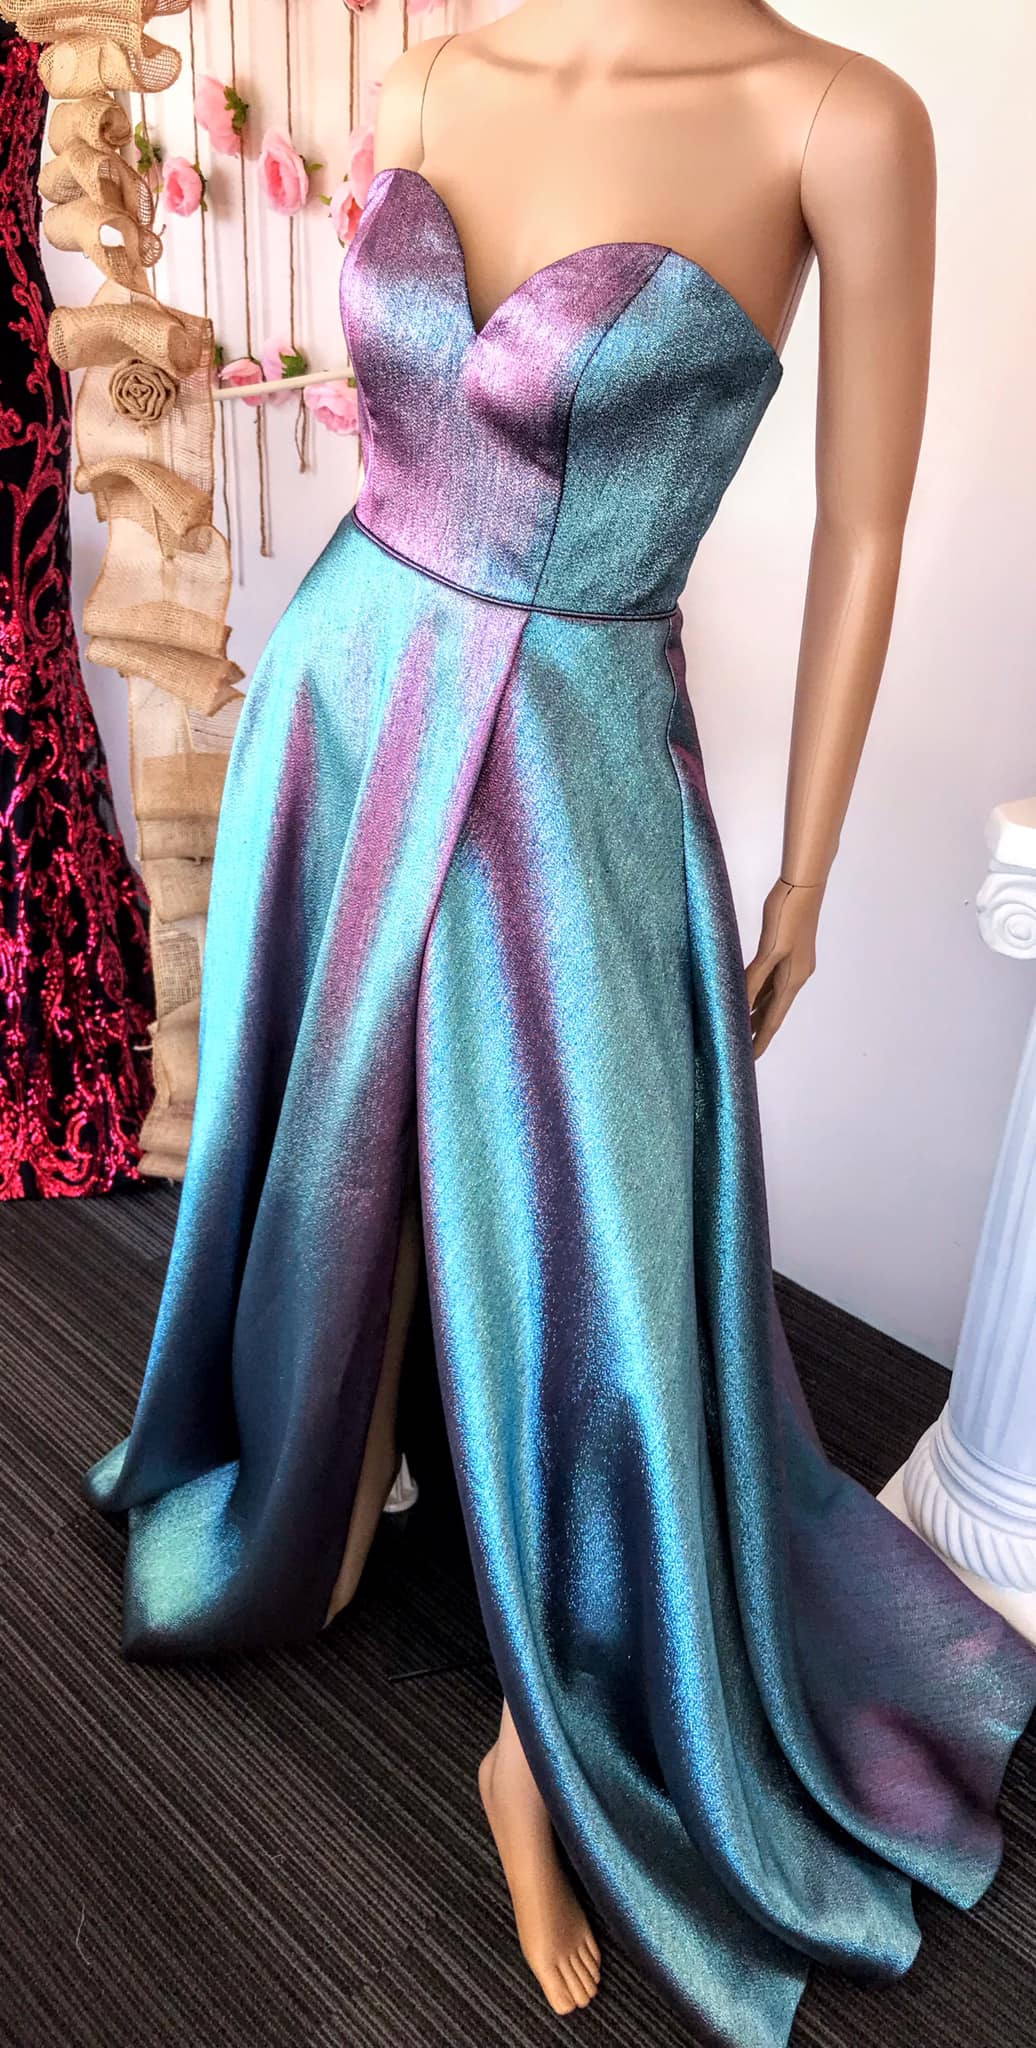 JVN by Jovani 3775 Iridescent Long Prom Dress High Slit A line Sweetheart Neckline - Color Changing Fabric! Evening gown 